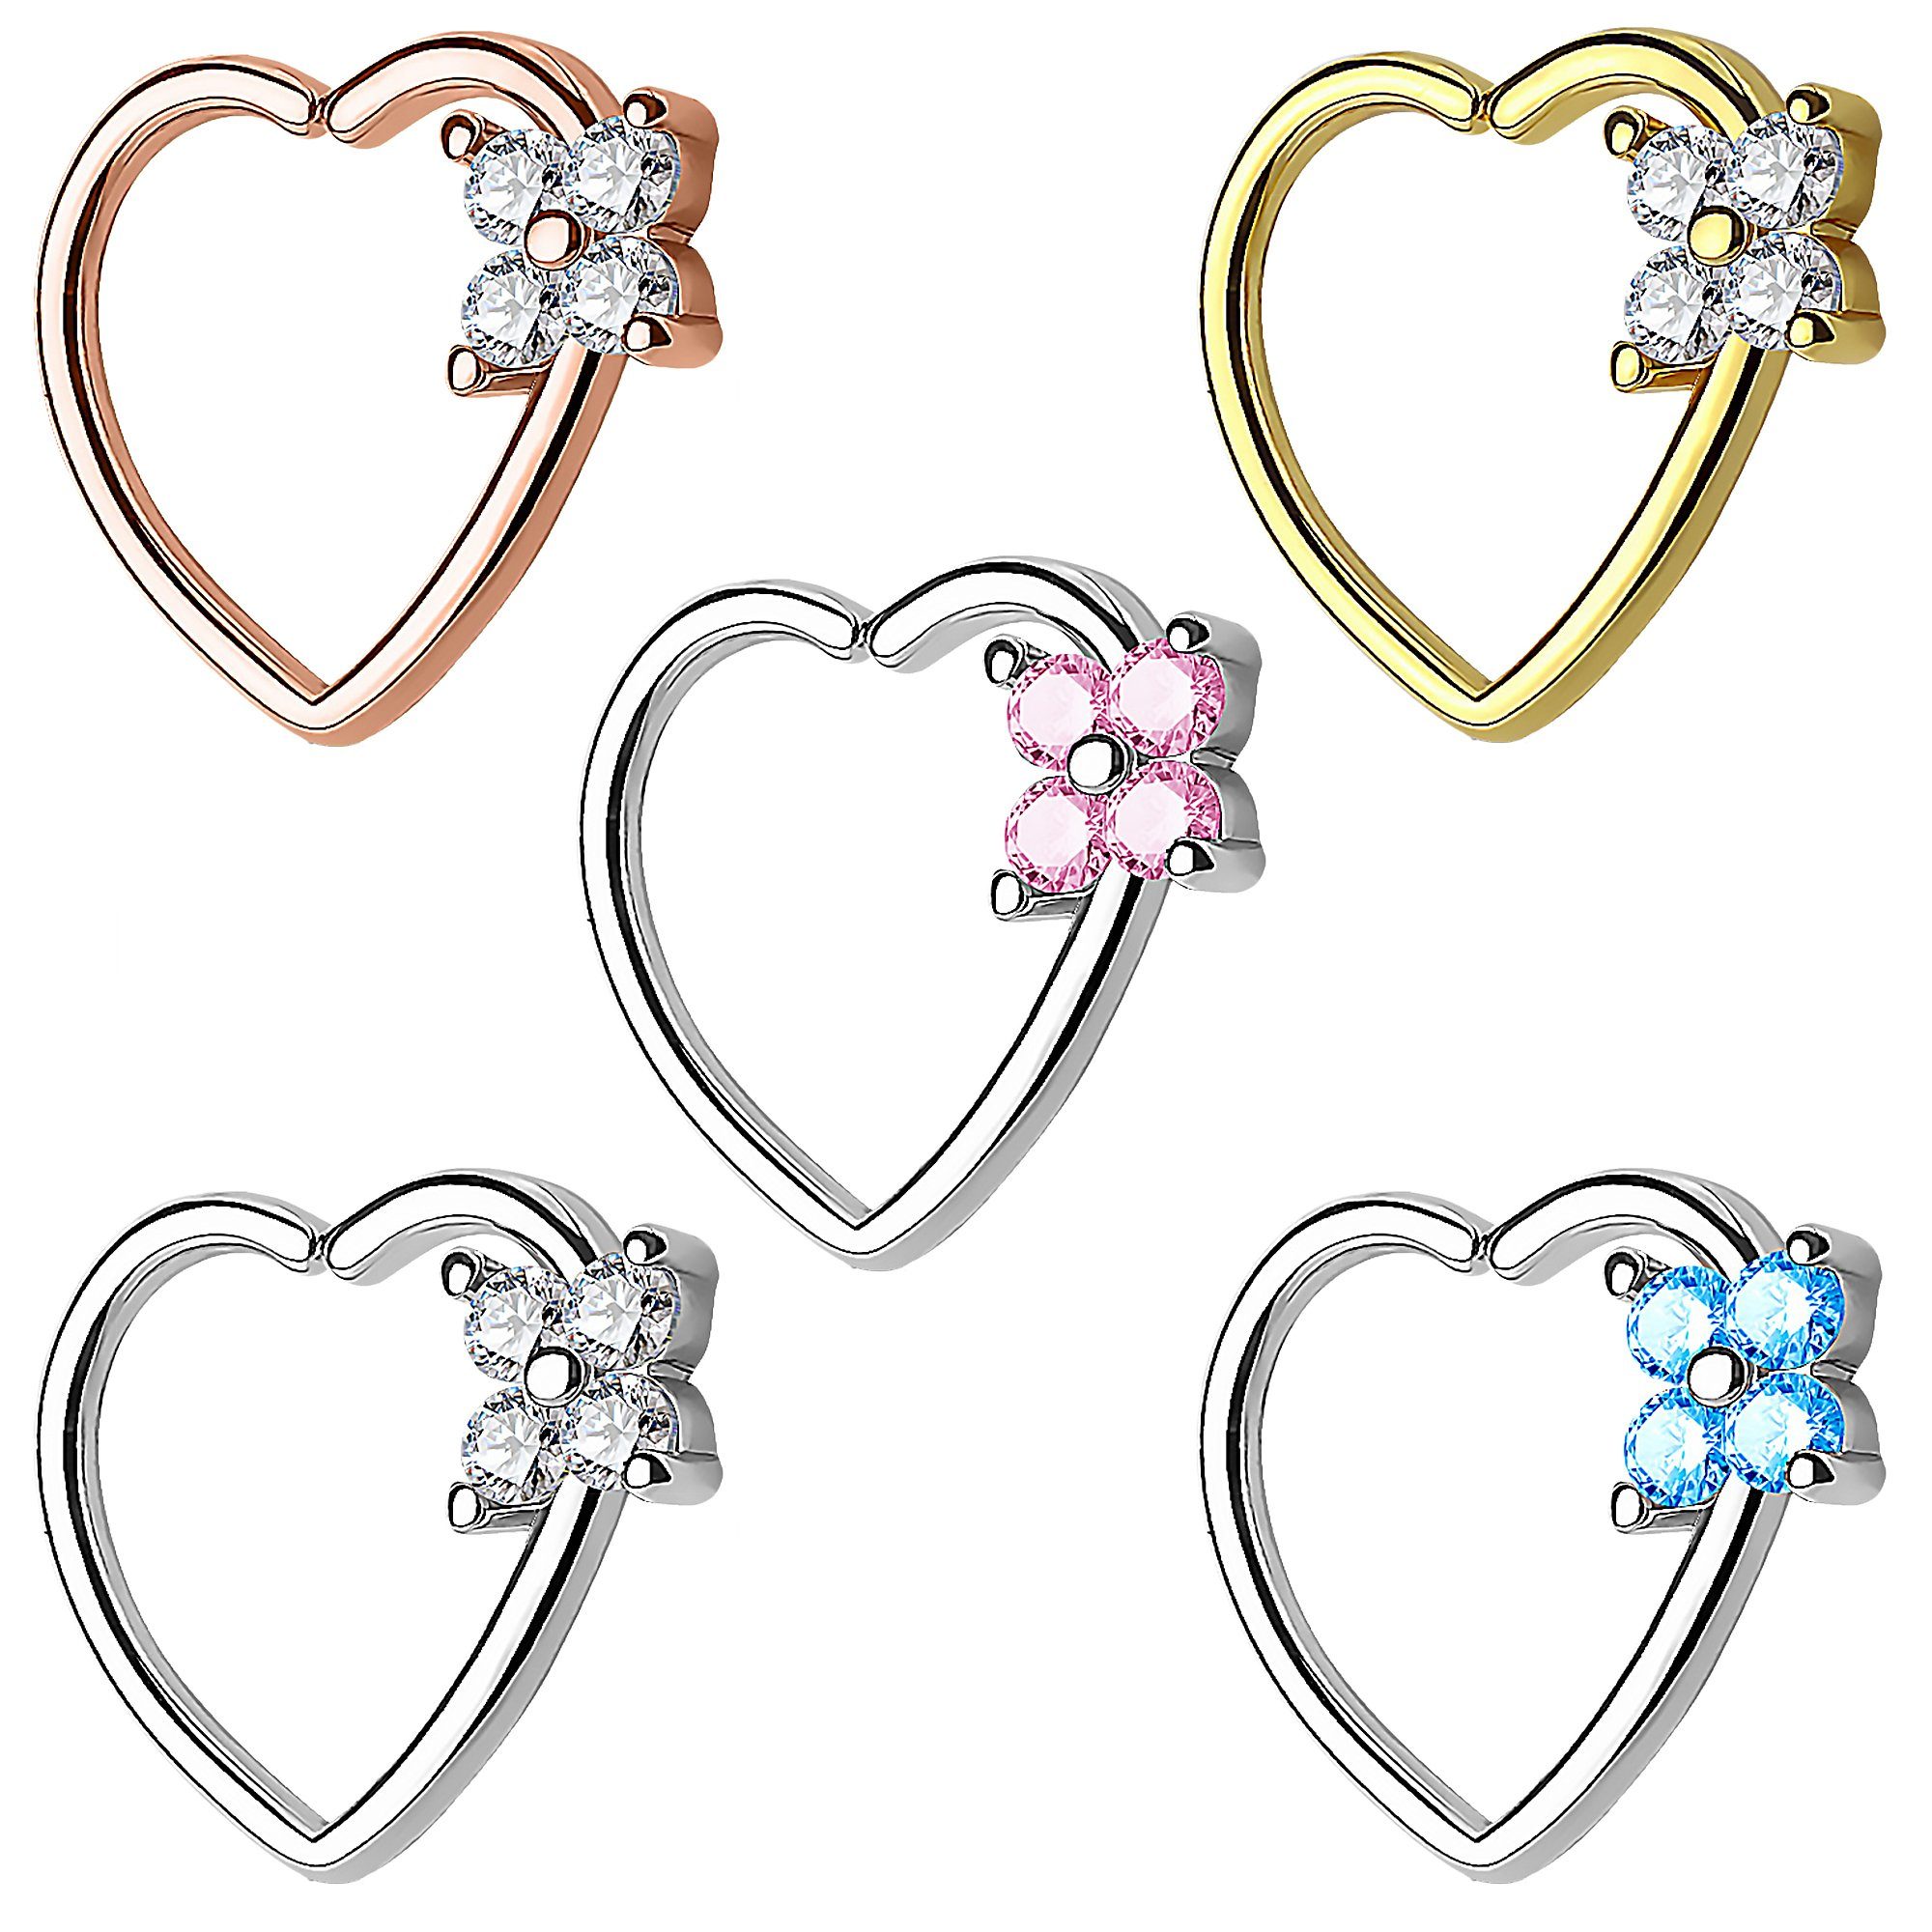 Ring Piercing - Ohrpiercing Helix Kleeblatt Taffstyle Clear Blume, Knorpel Ring Silber Kristall Continuous Piercing-Set Cartilage Tragus Strass Ohr Herz